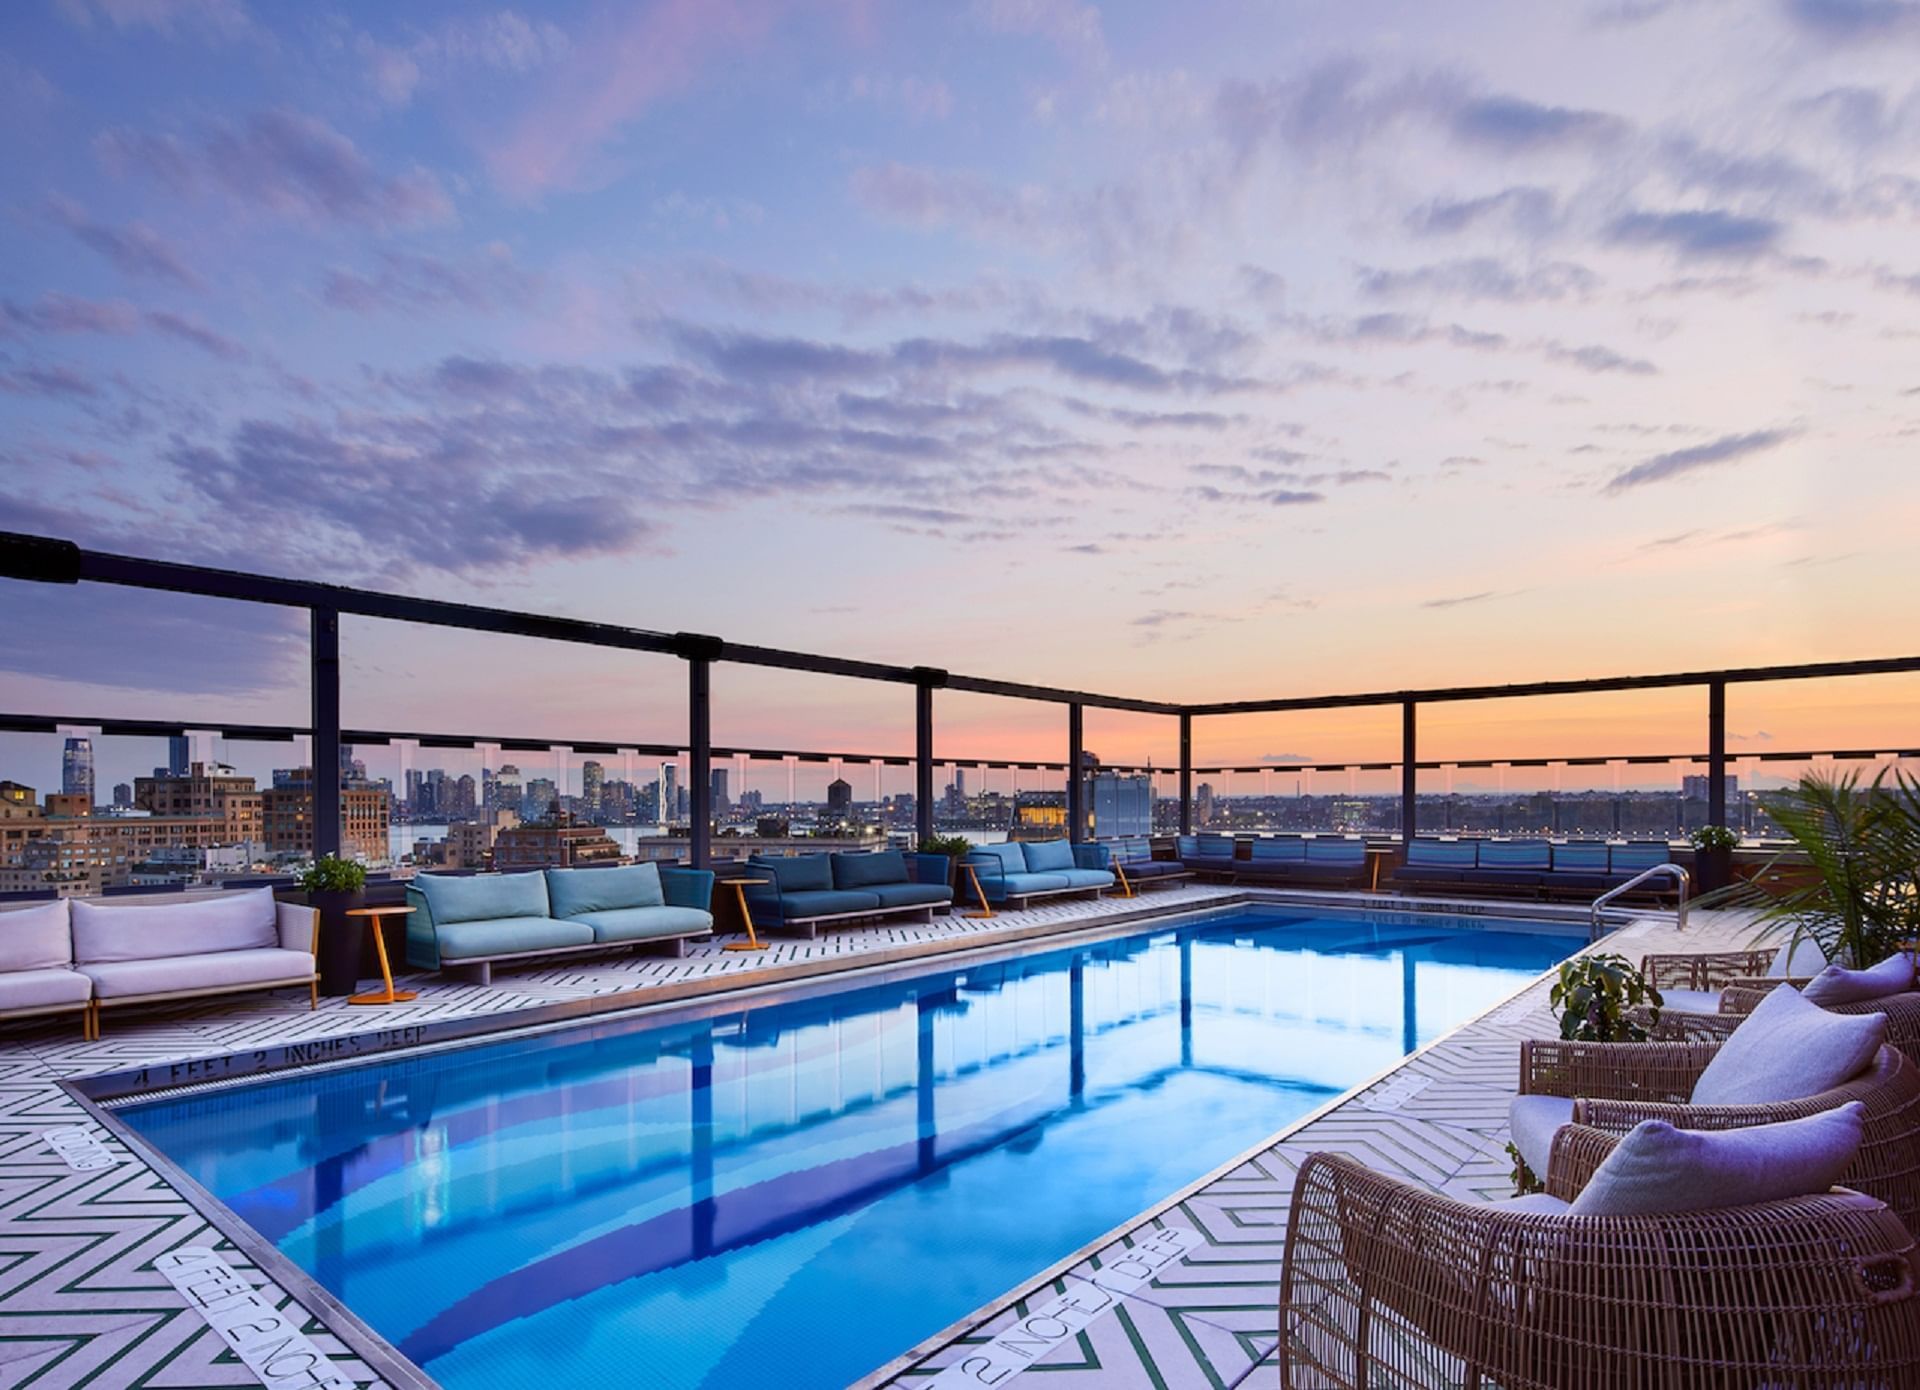 Lounge by the rooftop pool at Gansevoort Meatpacking NYC